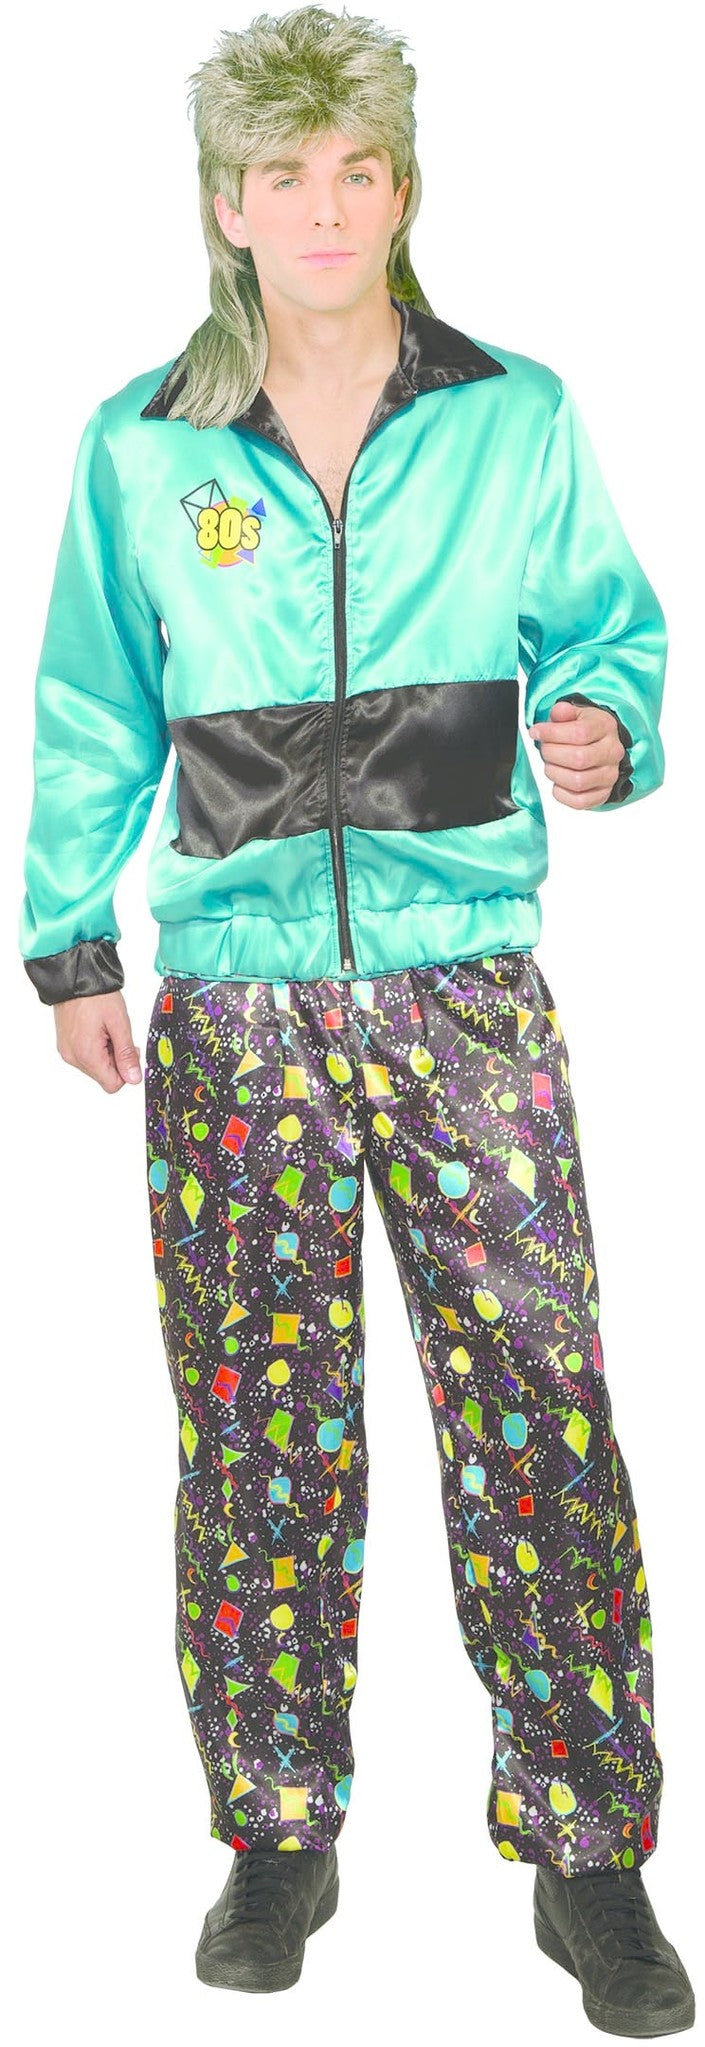 80's Track Suit Male - Standard Adult Size